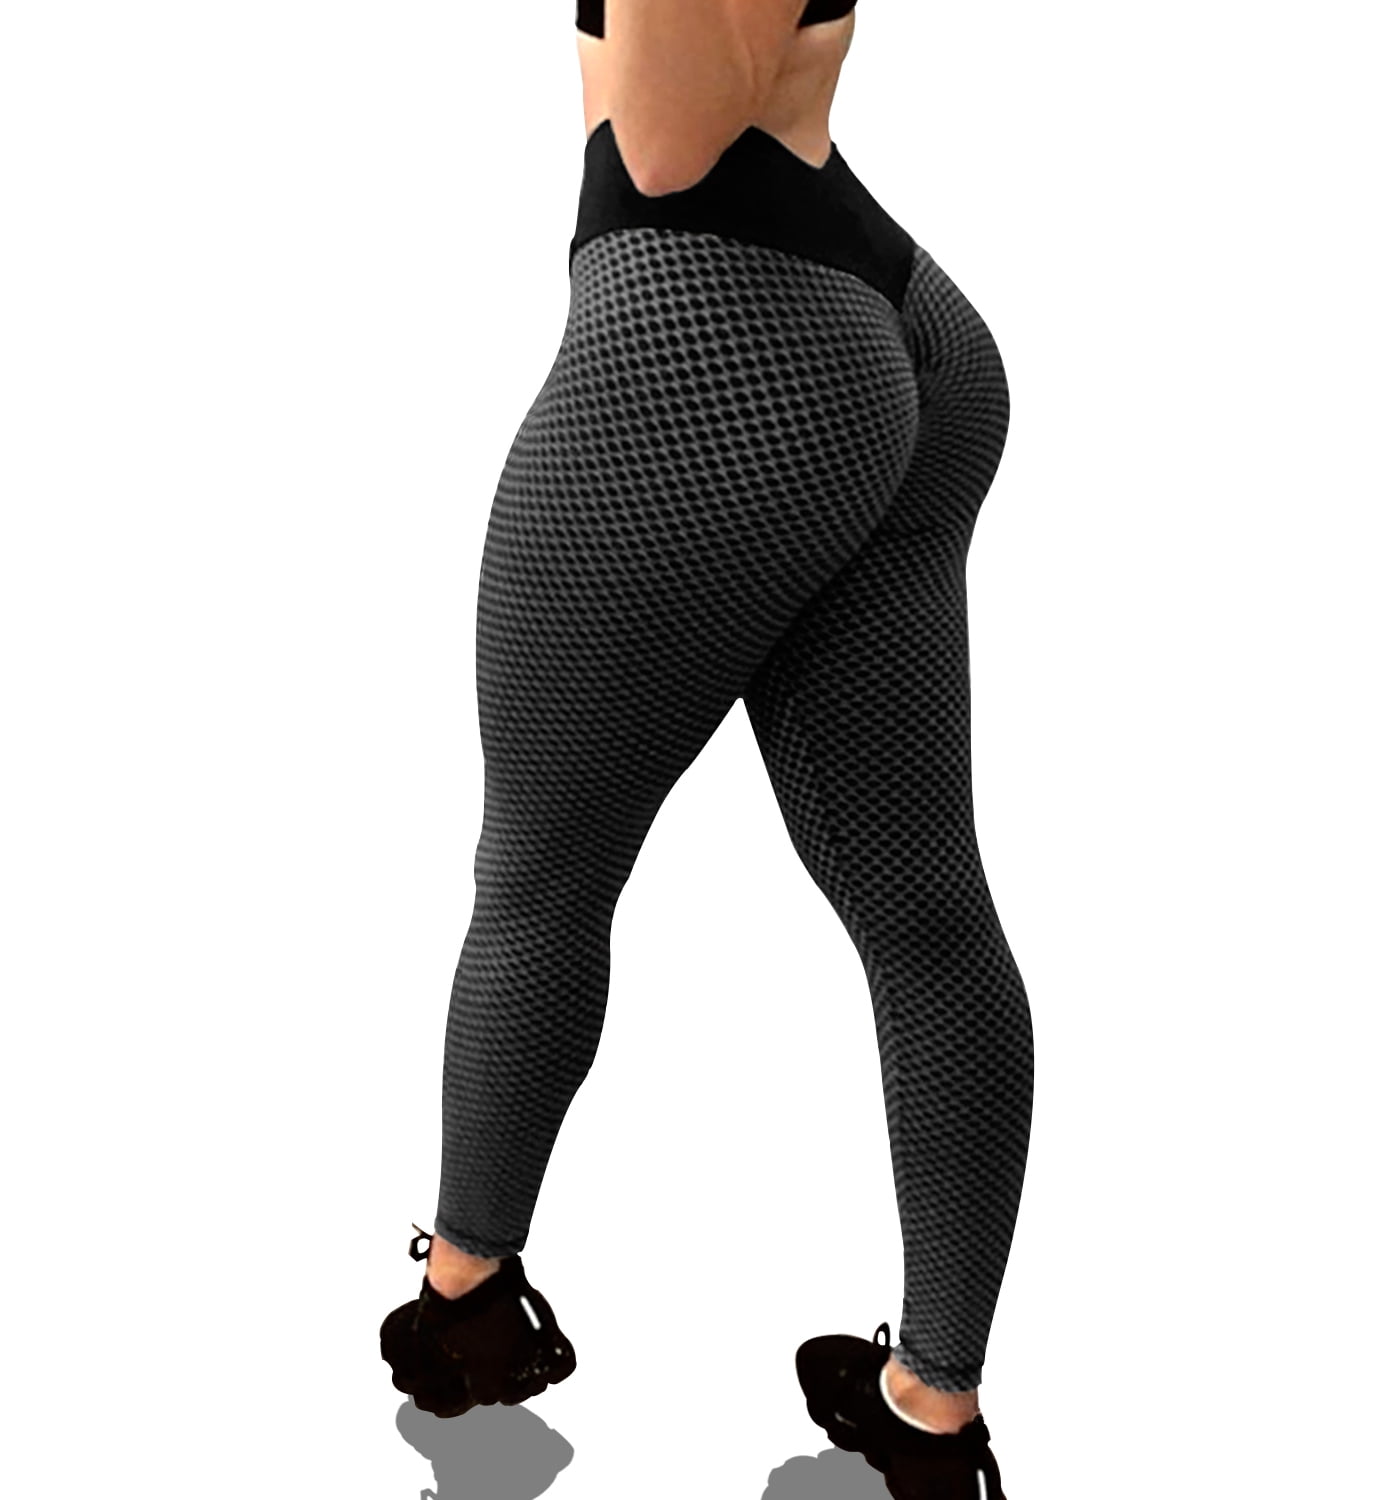 Details about   Womens Gym Leggings Anti-Cellulite Yoga Pants Ruched Fitness Elastic High Waist 